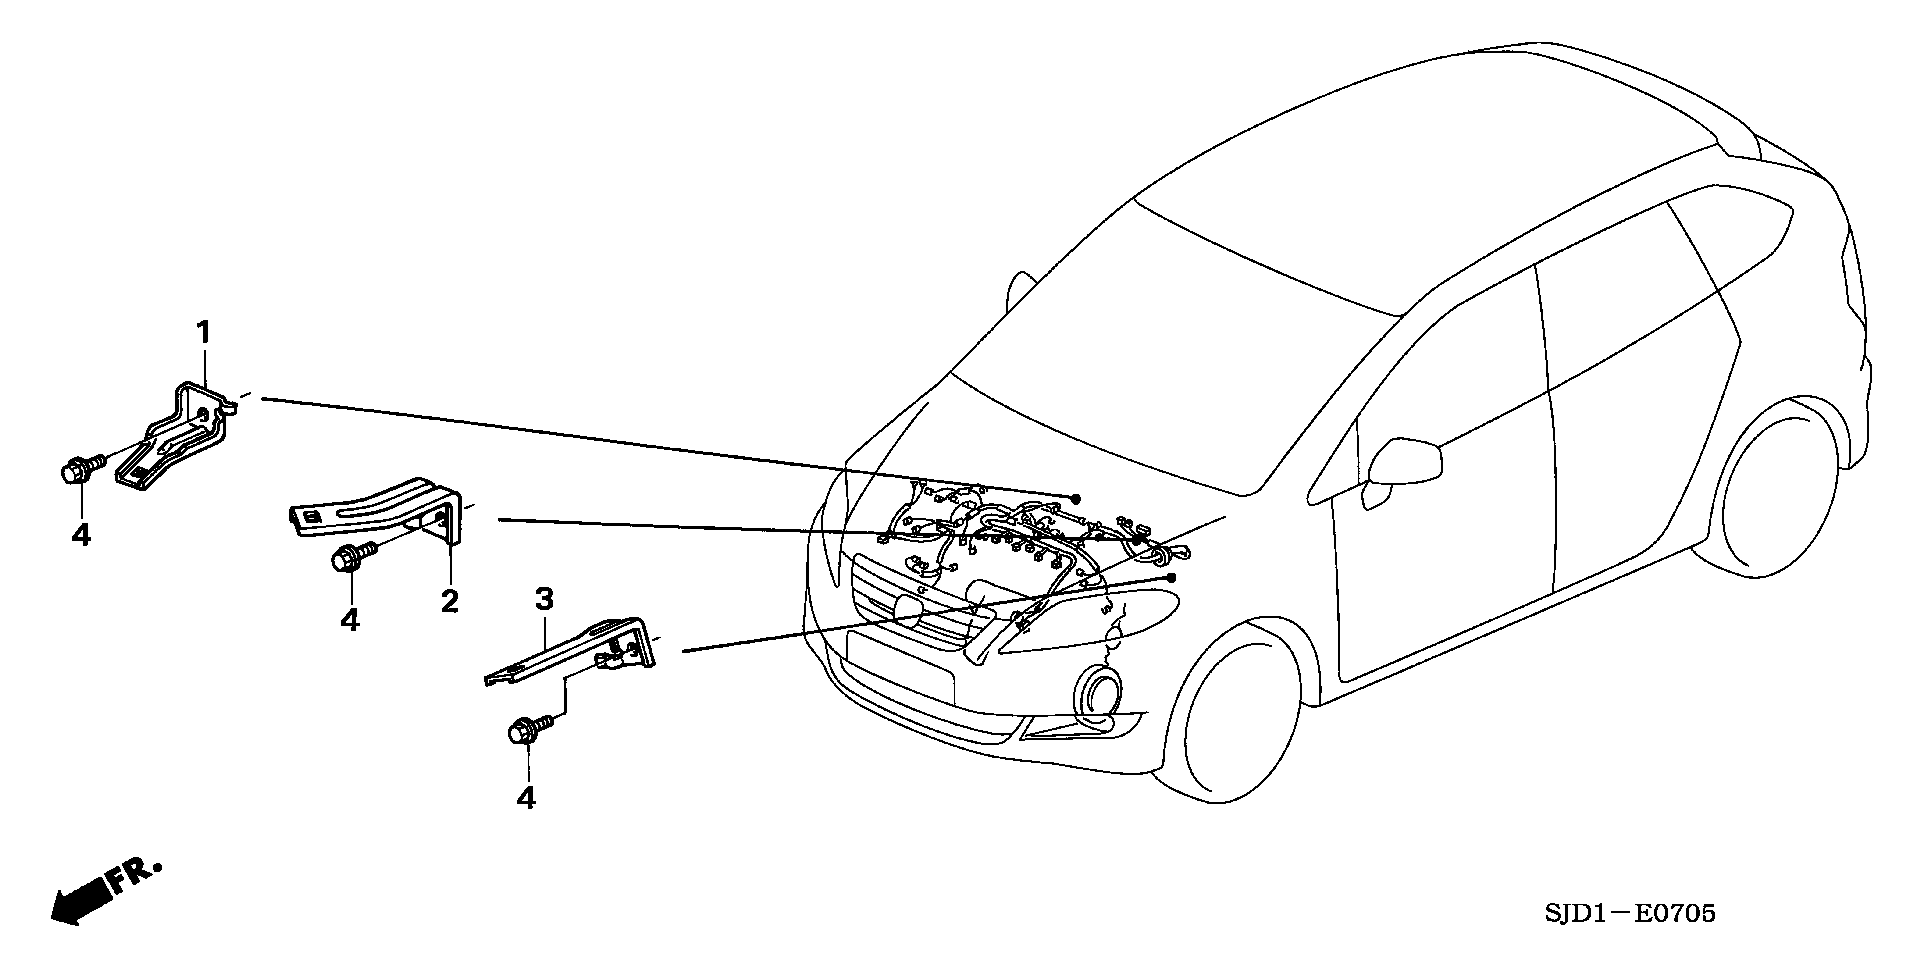 ENGINE WIRE HARNESS STAY(1.7L)